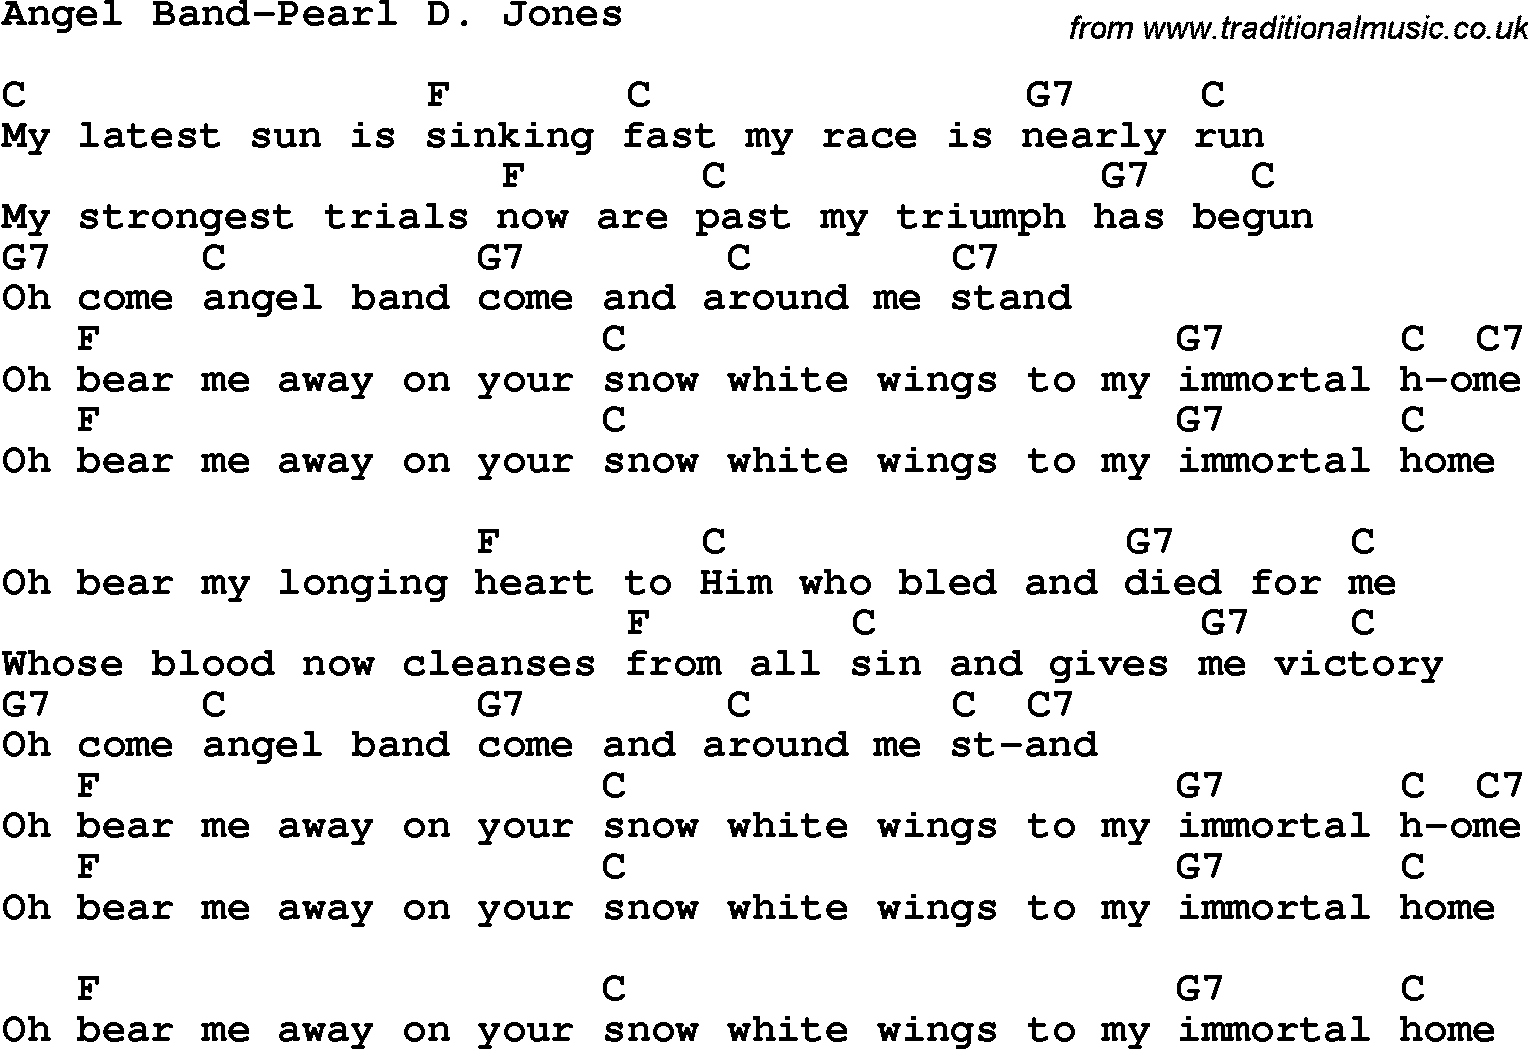 Country, Southern and Bluegrass Gospel Song Angel Band-Pearl D Jones lyrics and chords